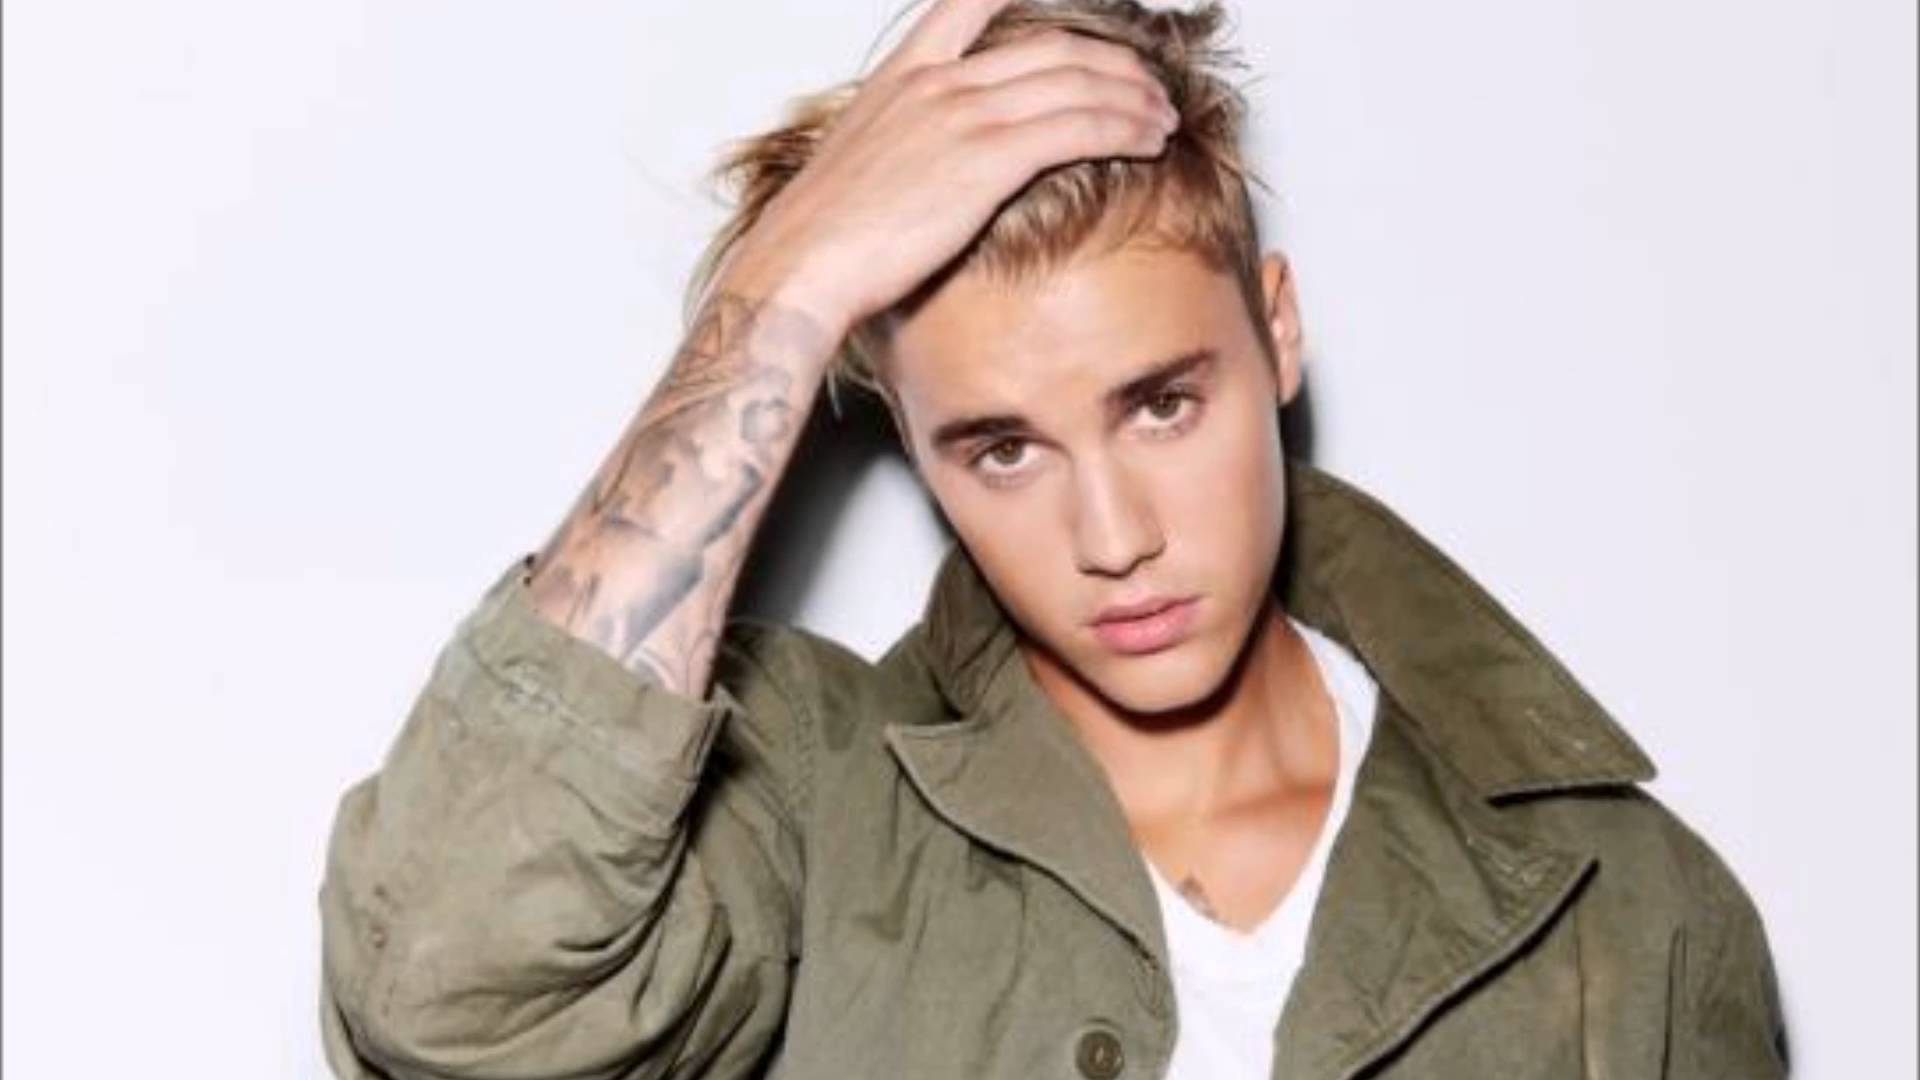 Justin Bieber 2016 Image Related Keywords & Suggestions